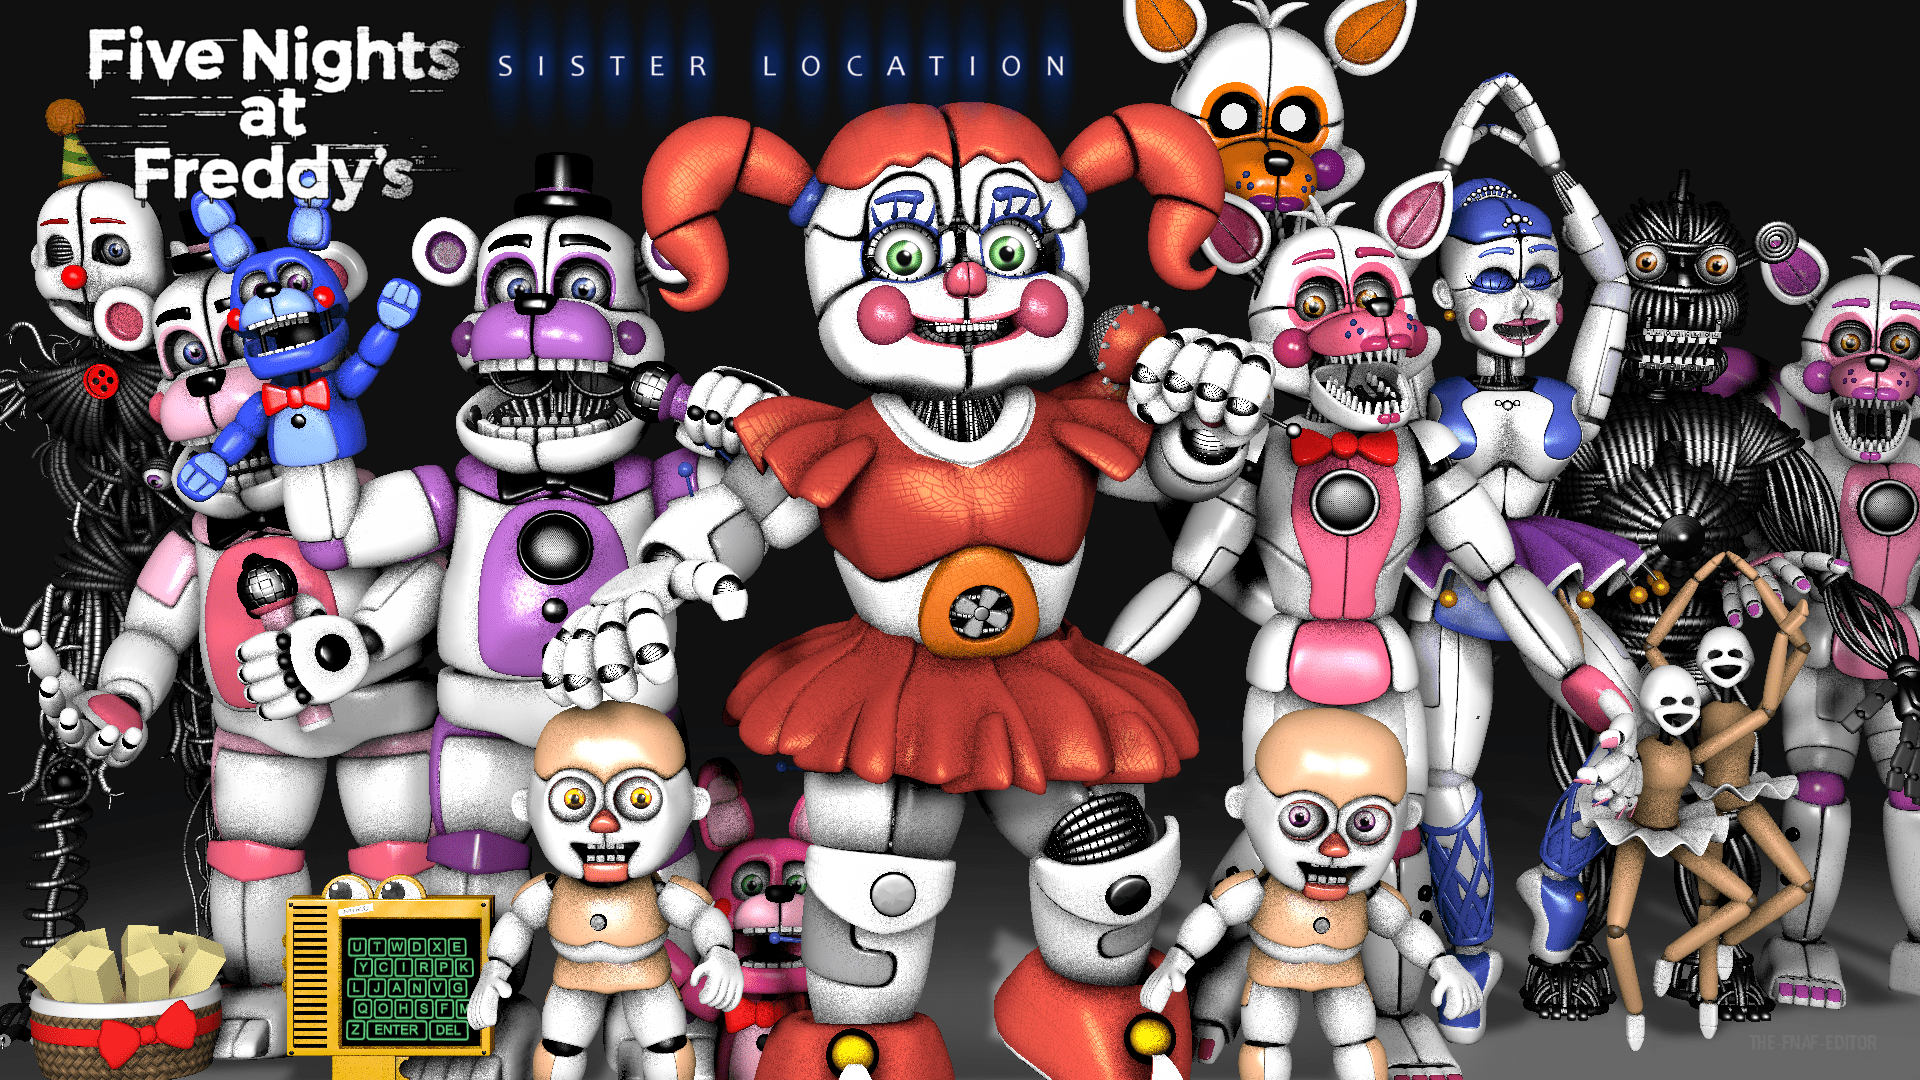 Sister Location wallpaper by AftonProduction on DeviantArt